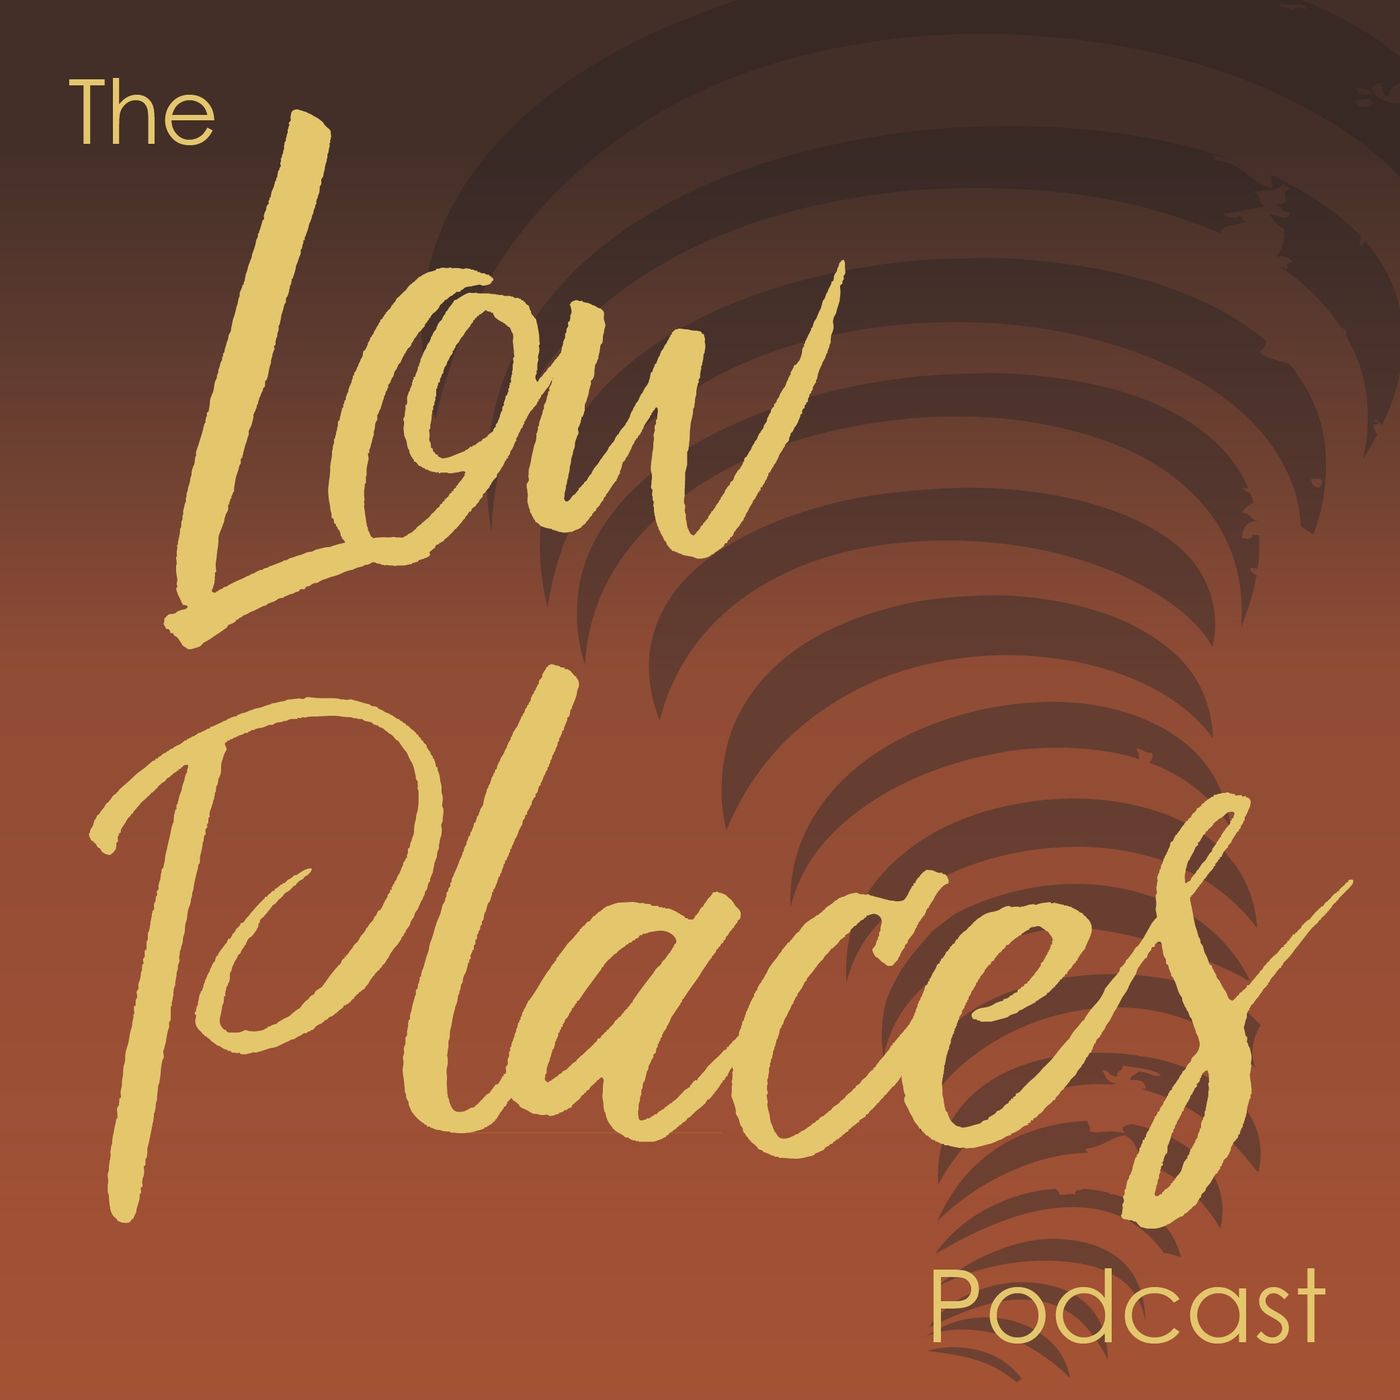 The Low Places Podcast